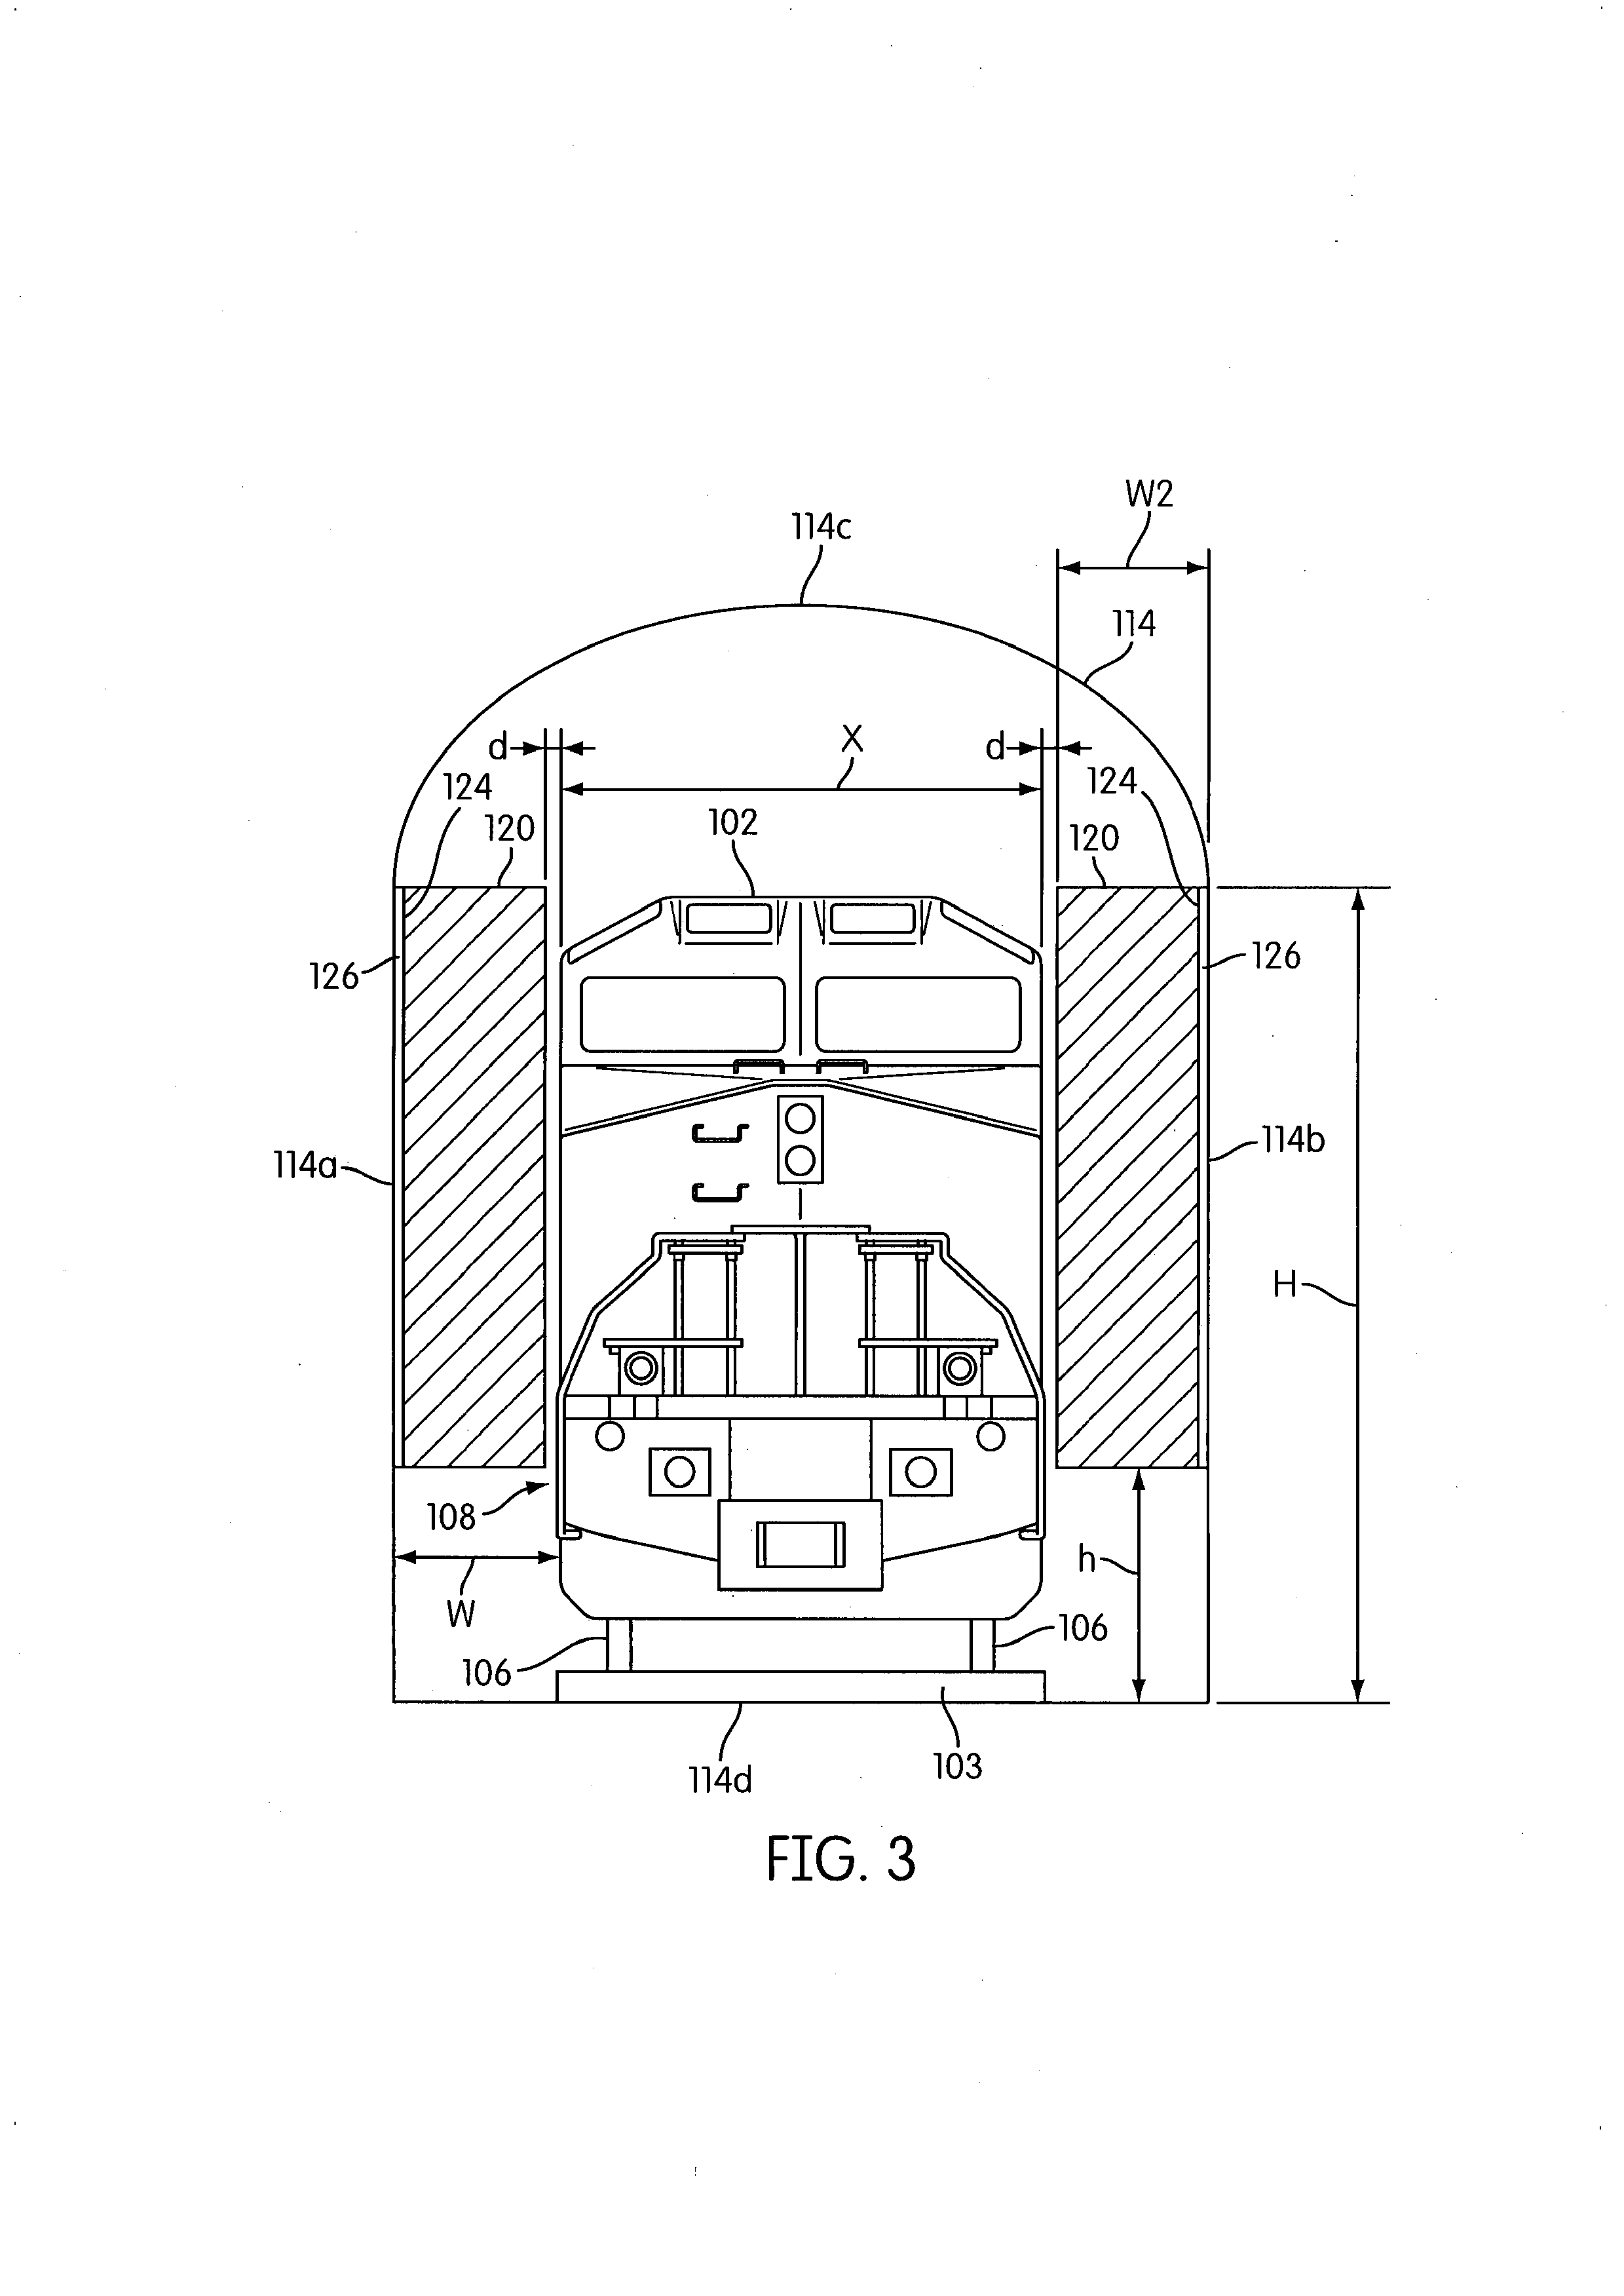 Air baffles in railroad tunnels for decreased airflow therein and improved ventilation and cooling of locomotives